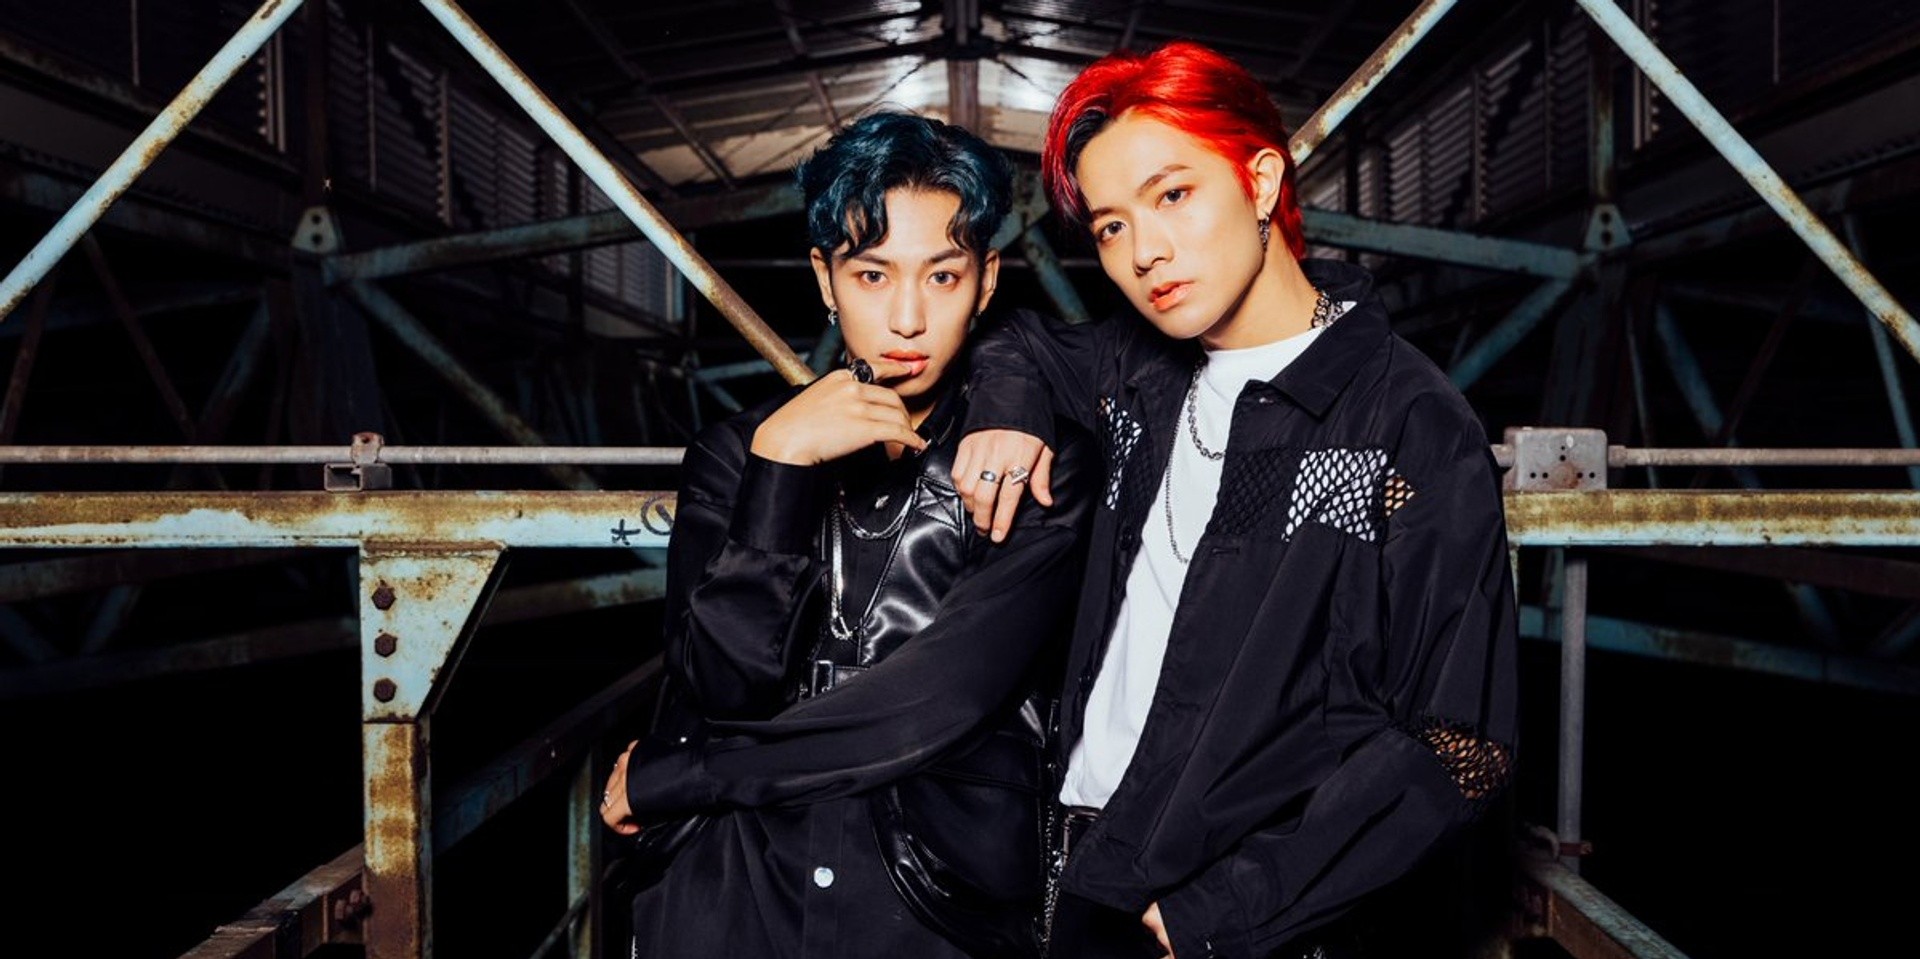 WARPs UP's LANGYI and MINGJUN talk about their new release, 'Power_信 (xin)', missing fans, and gearing up for 2022: "Don't be afraid of difficulties and never give up."